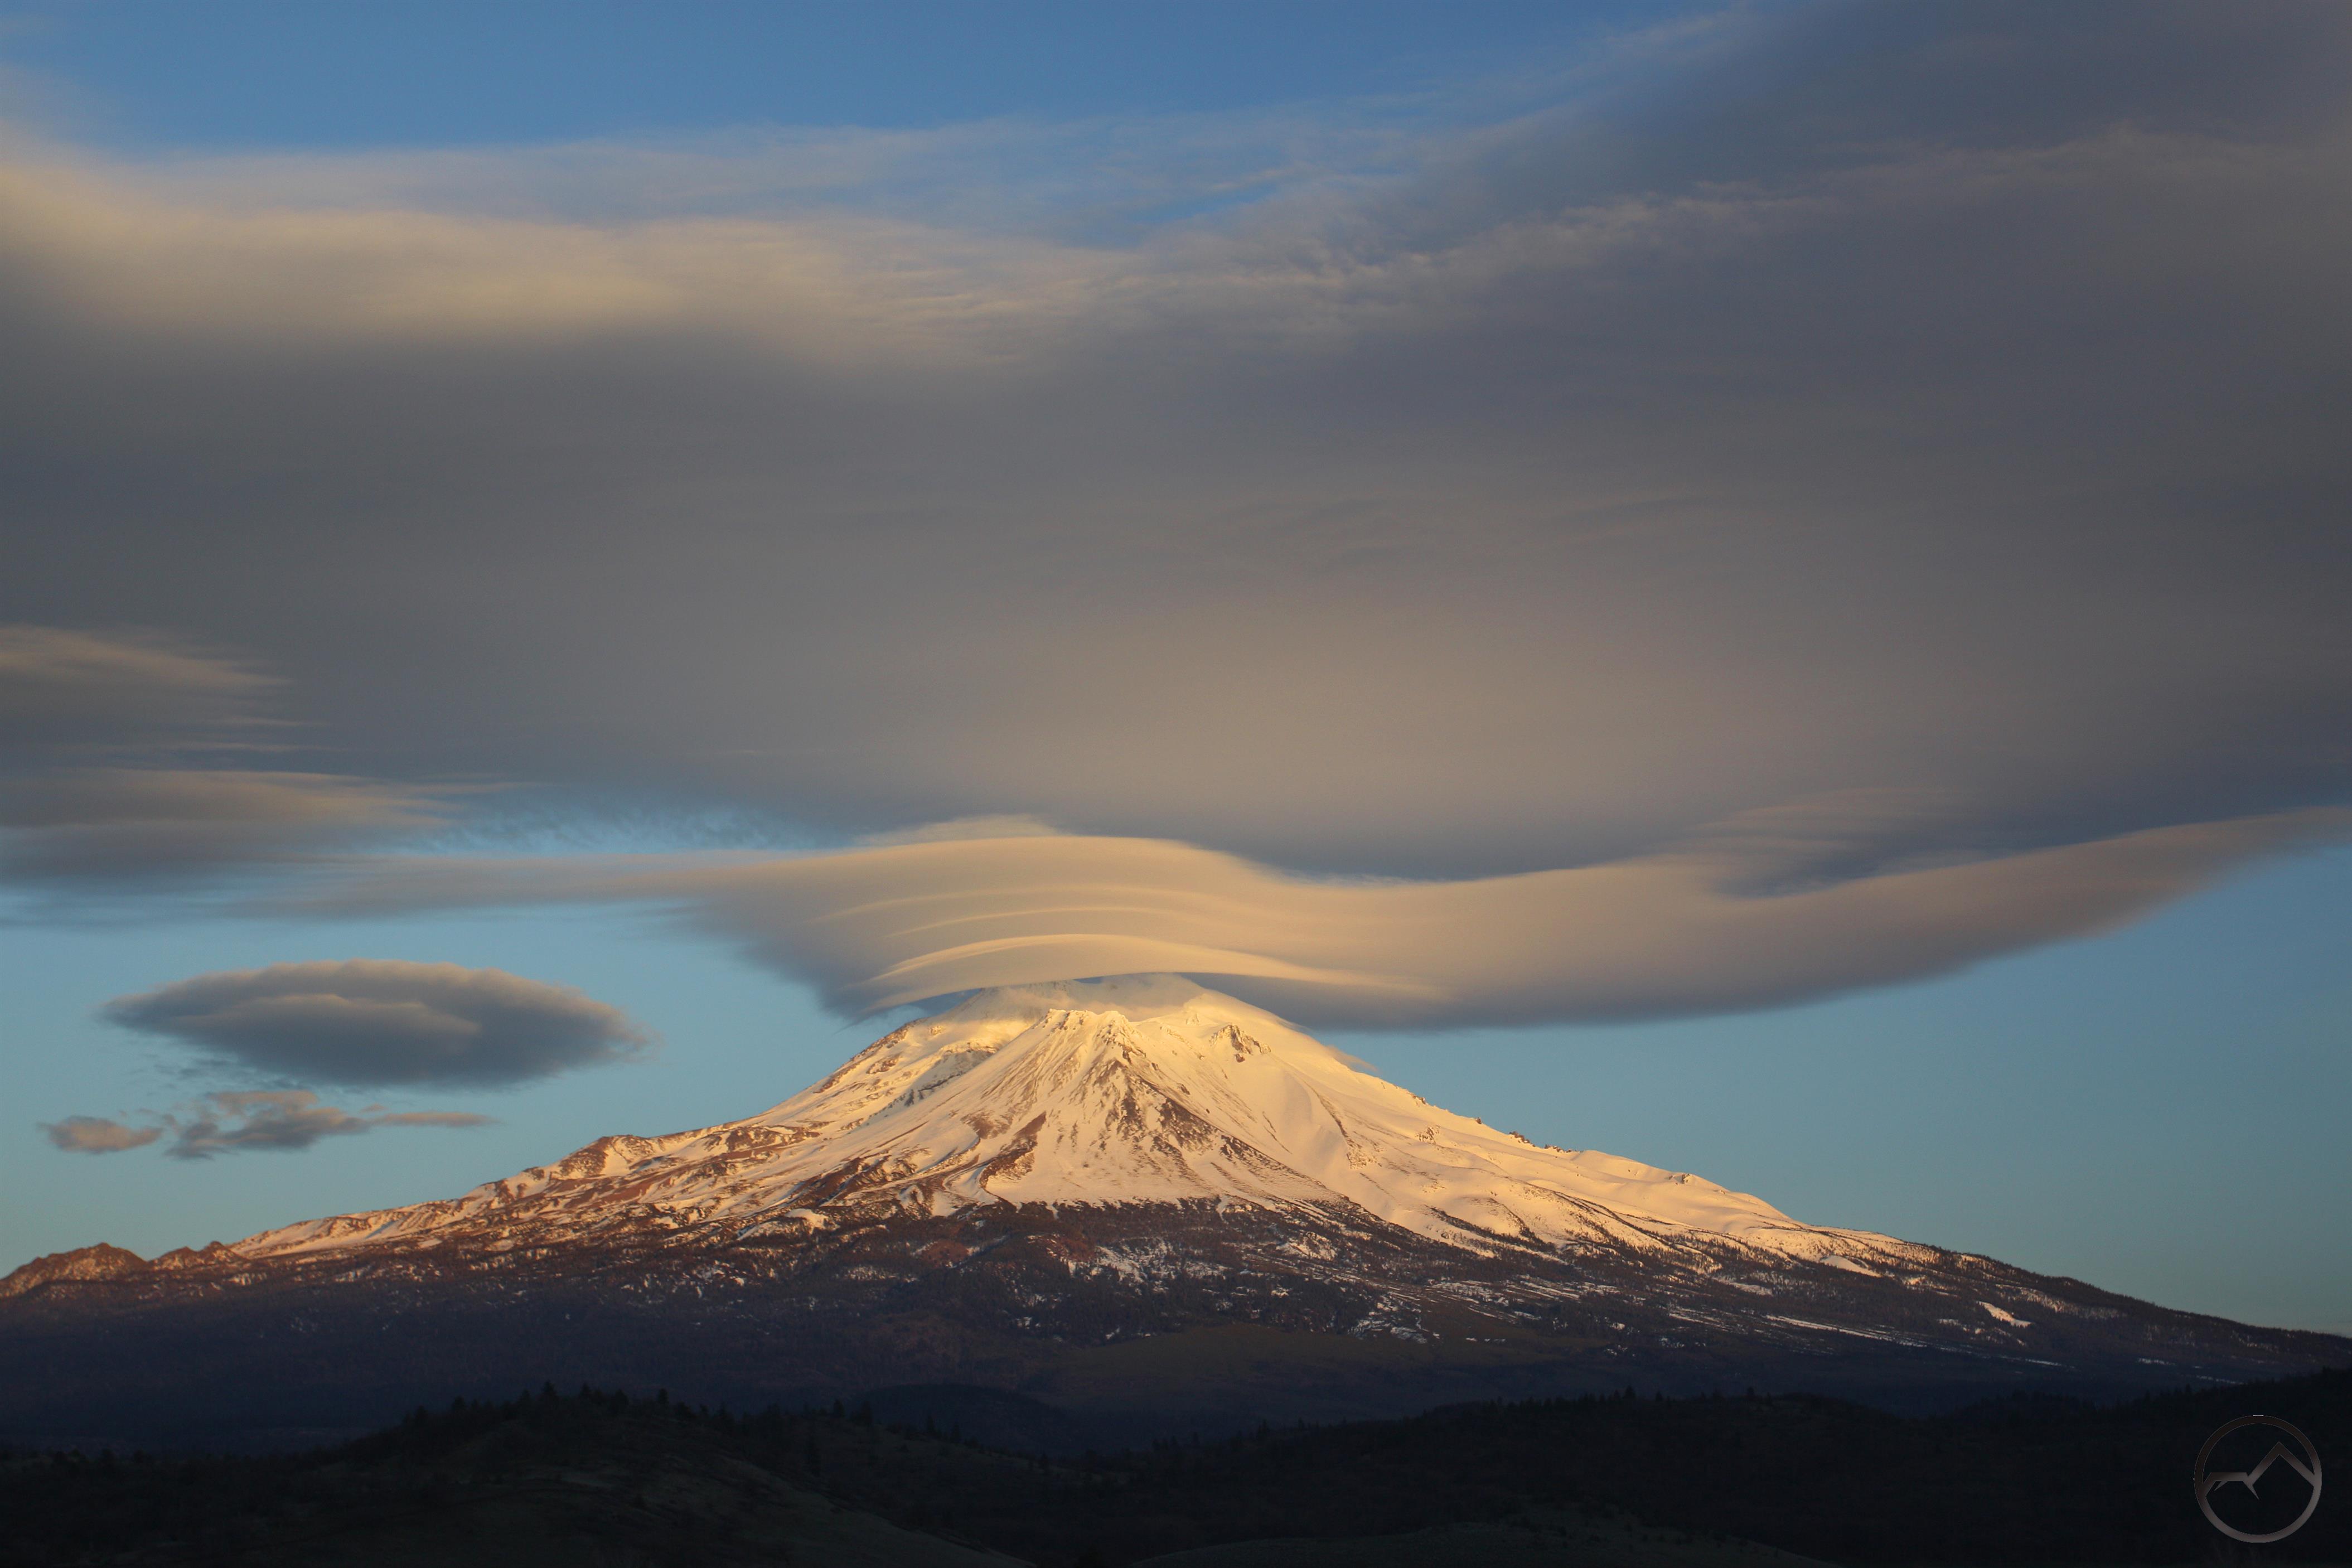 One of the pleasures of living near Mount Shasta is the opportunity to obse...